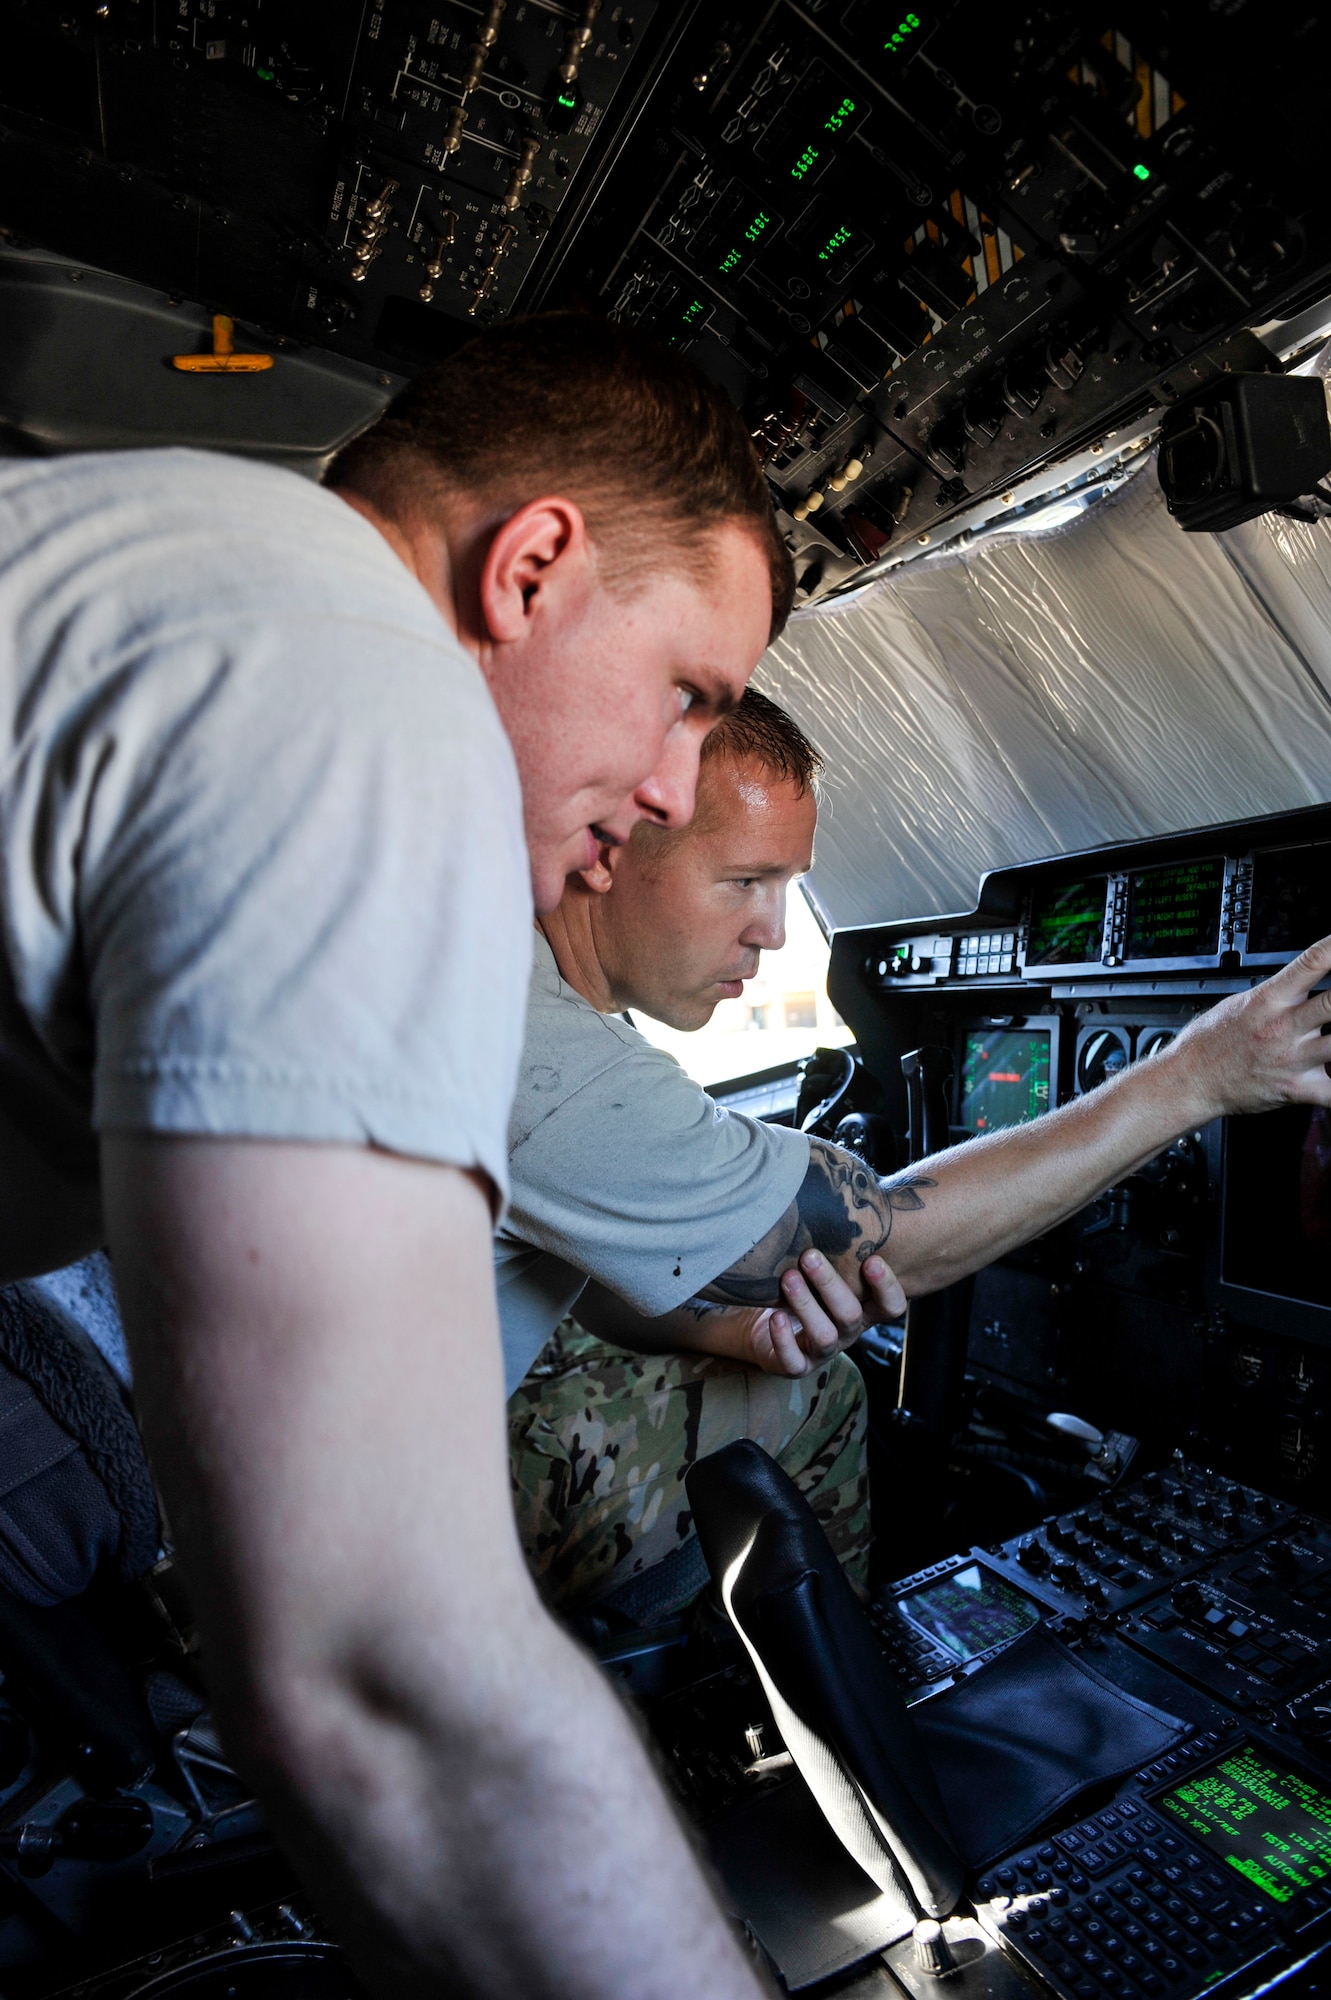 Senior Airman Timothy Cullen, a 19th Aircraft Maintenance Squadron electronic and environmental systems journeyman, and Staff Sgt. Joshua Jorgensen, a 19th AMXS crew chief, troubleshoot a warning light June 9, 2015, at Little Rock Air Force Base, Ark. After reloading software to an electronic circuit breaker unit, the issue was resolved. (U.S. Air Force photo by Senior Airman Stephanie Serrano)